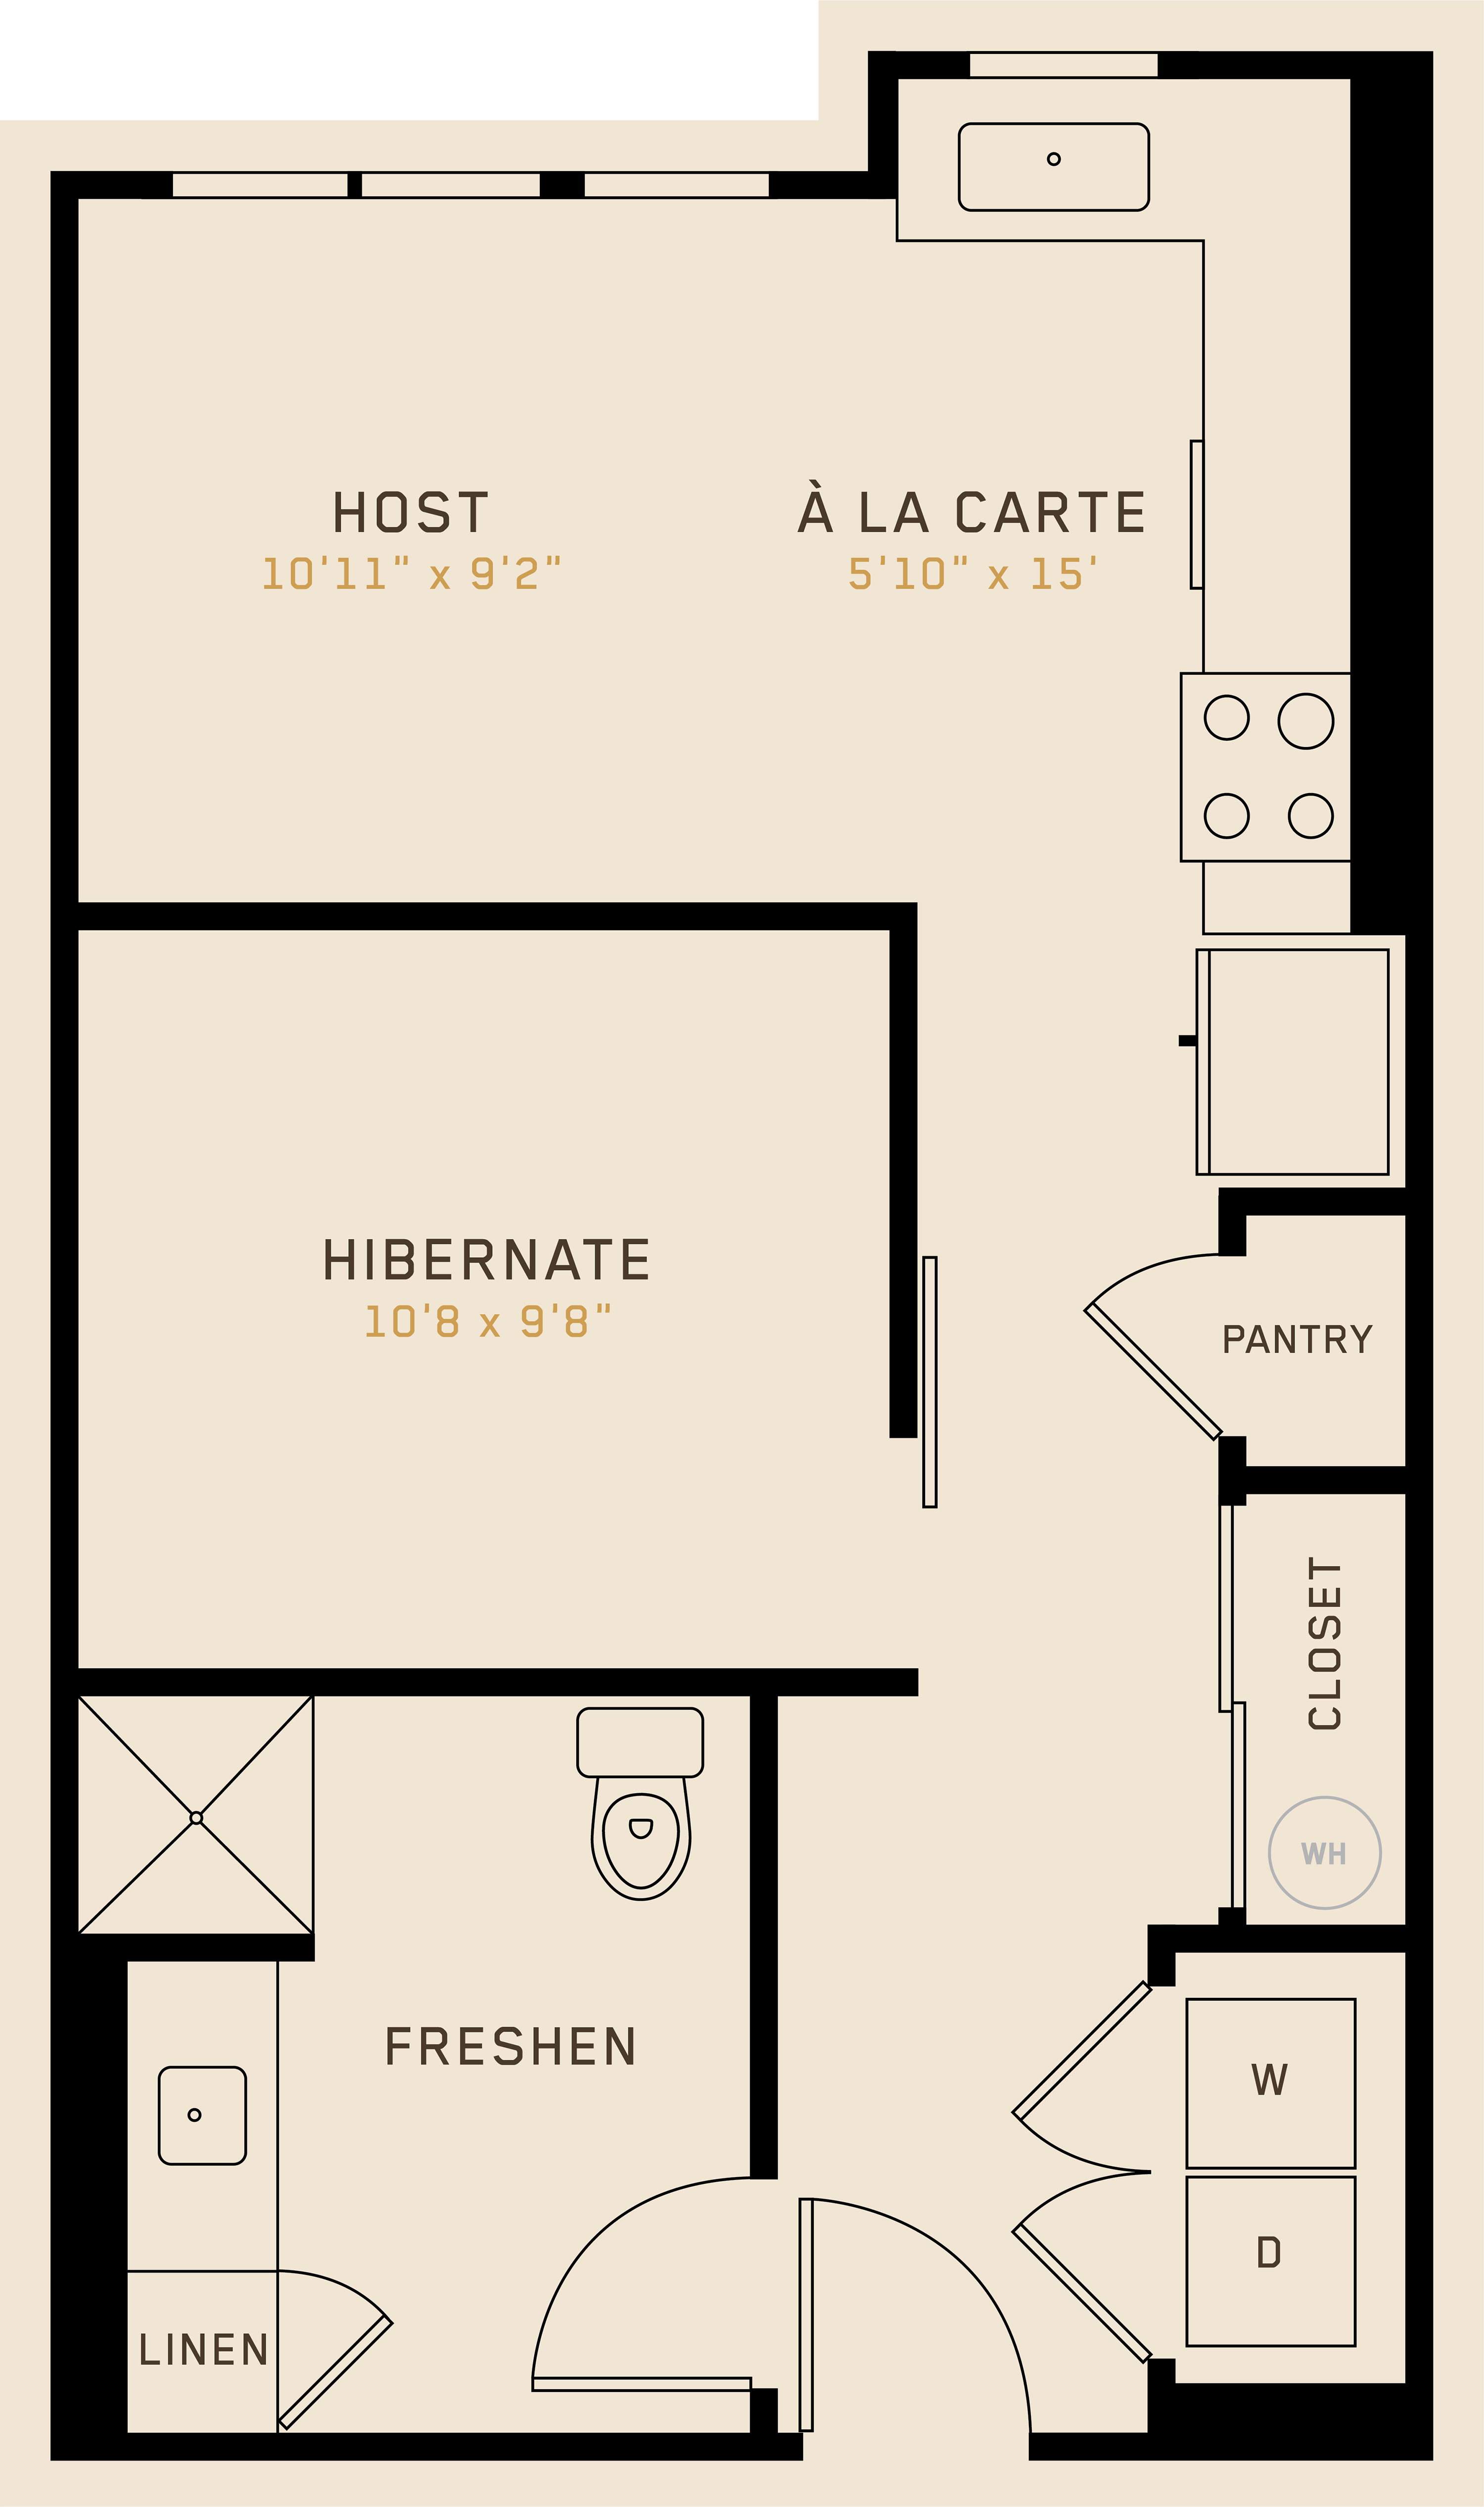 S1F floor plan featuring 1 bedroom, 1 bathroom, and is 562 square feet